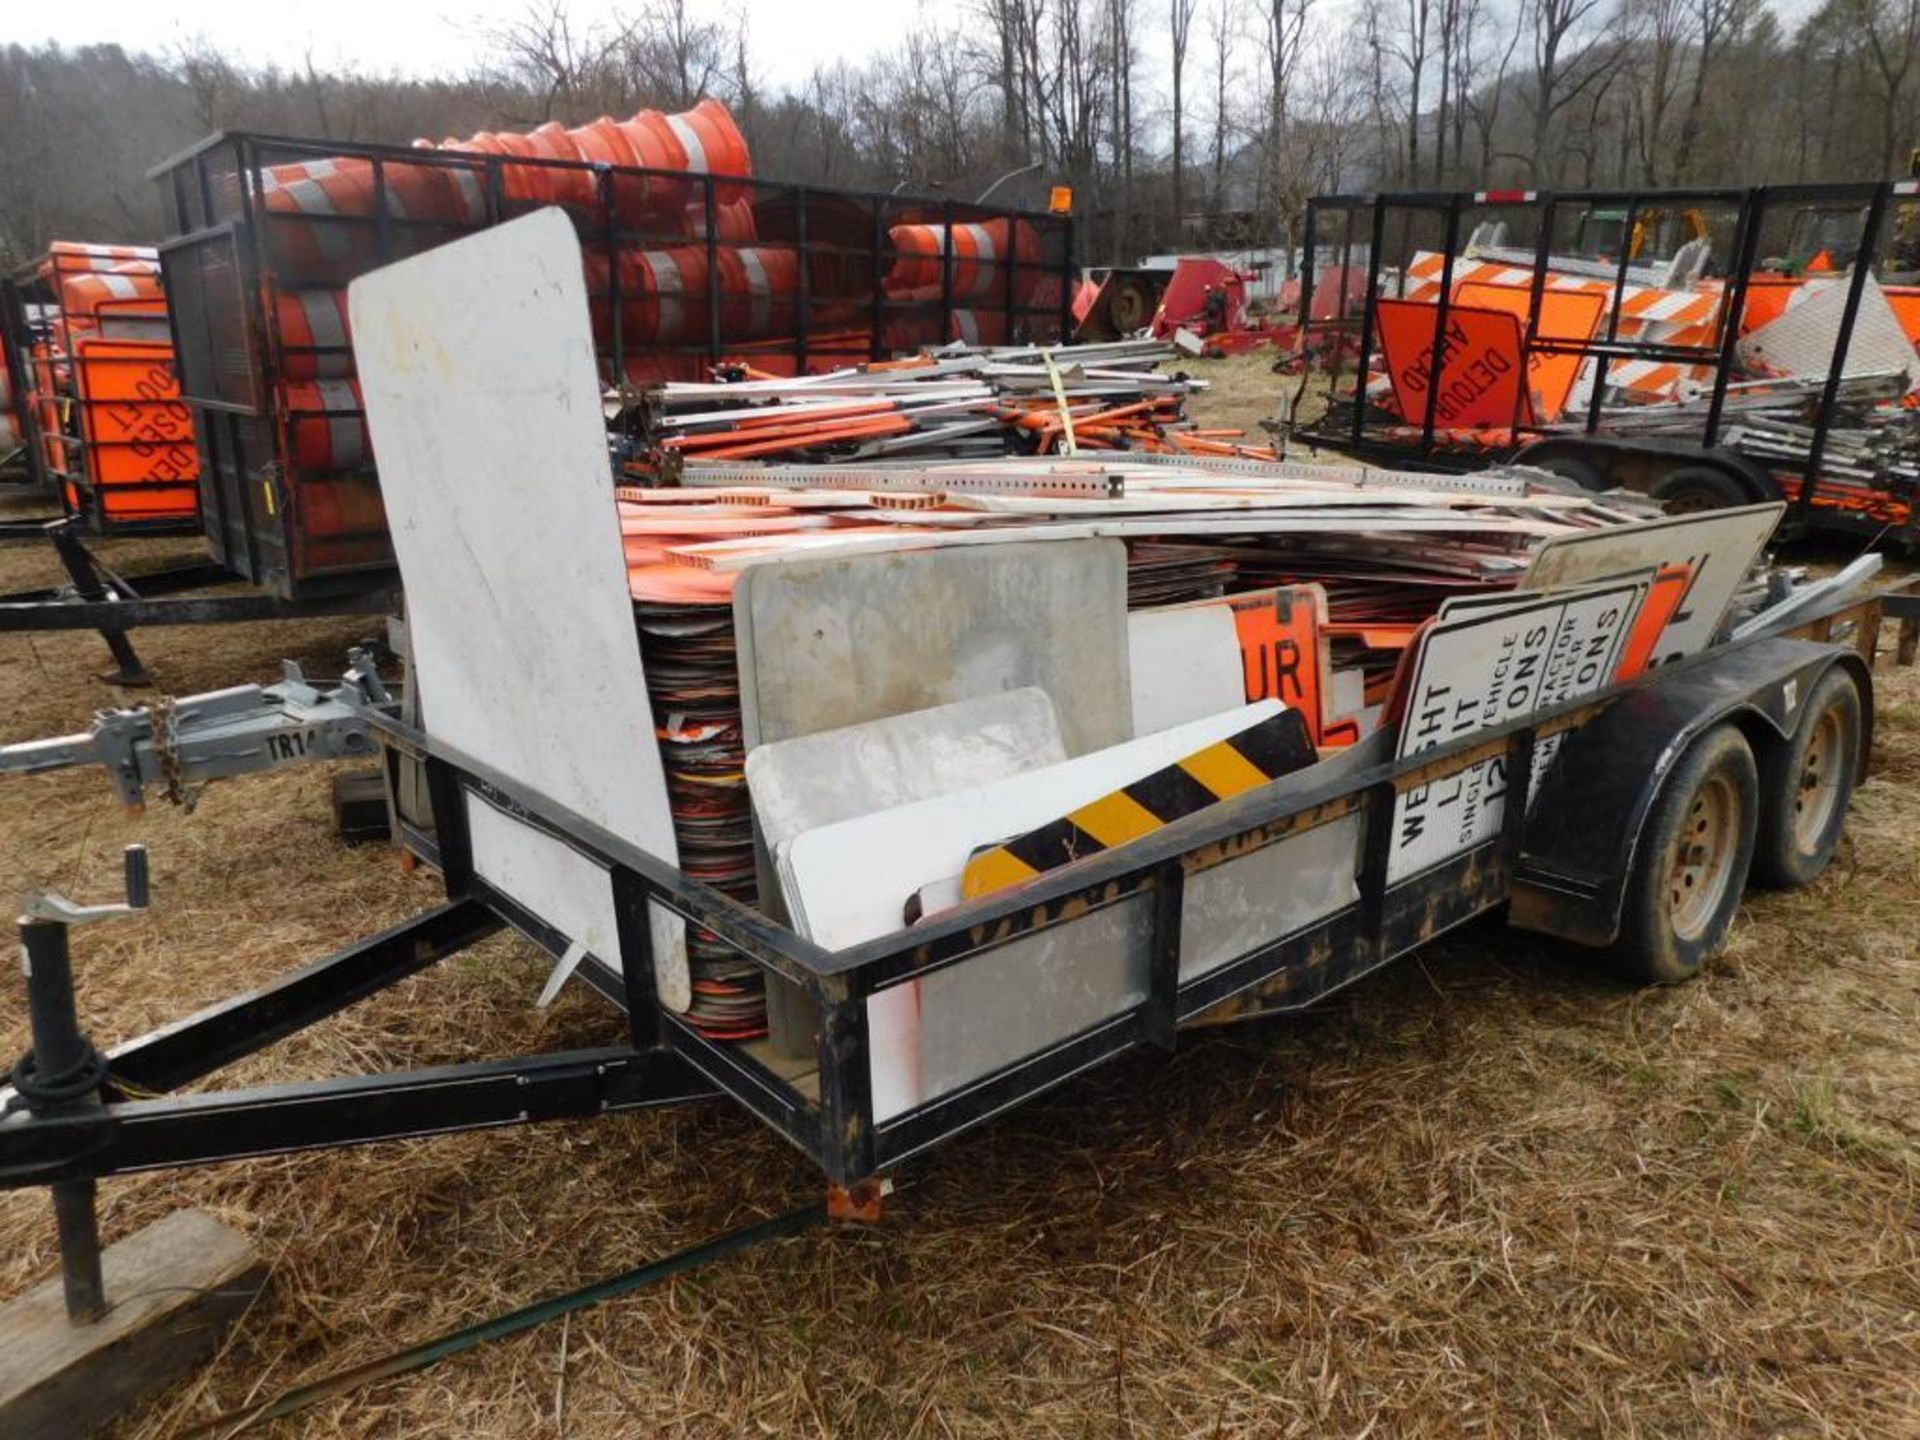 16' Utility Trailer, Dual-Axle w/Contents of Road Signs, etc, "No VIN", TR32 - Image 2 of 4